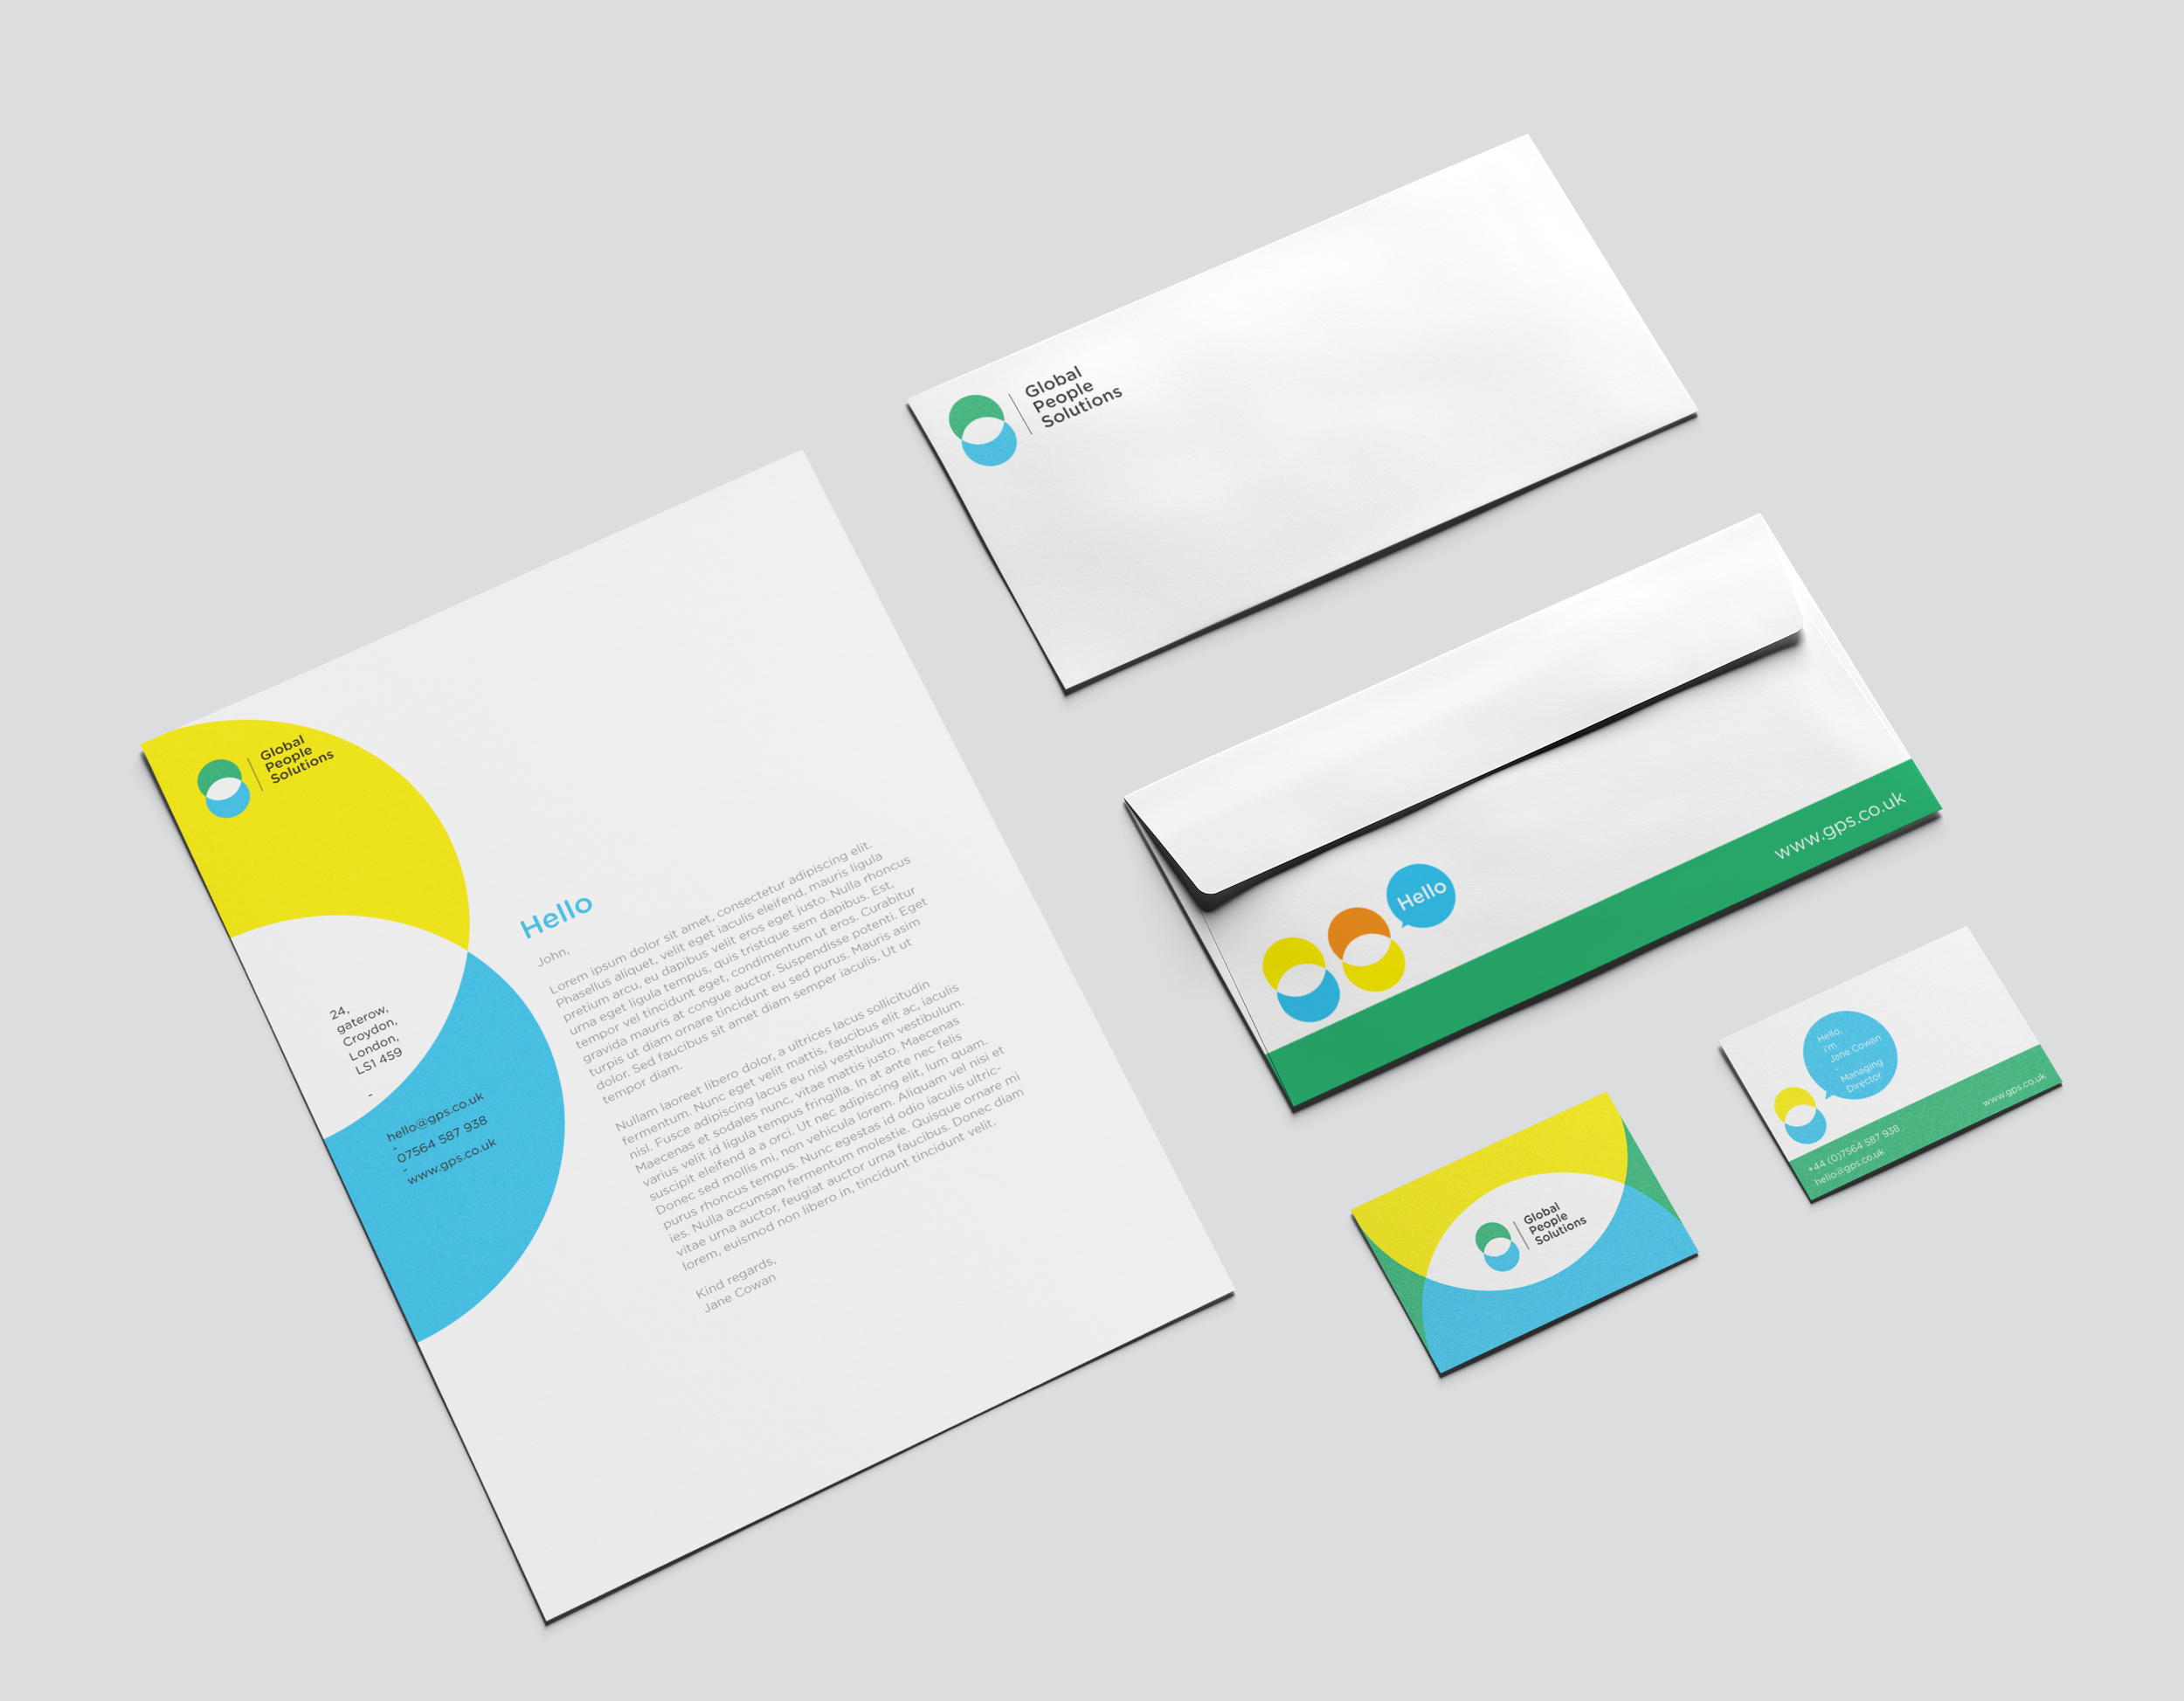 Brand consultant UK Mixture of Global People Solutions branded A4 paper, envelope and business cards